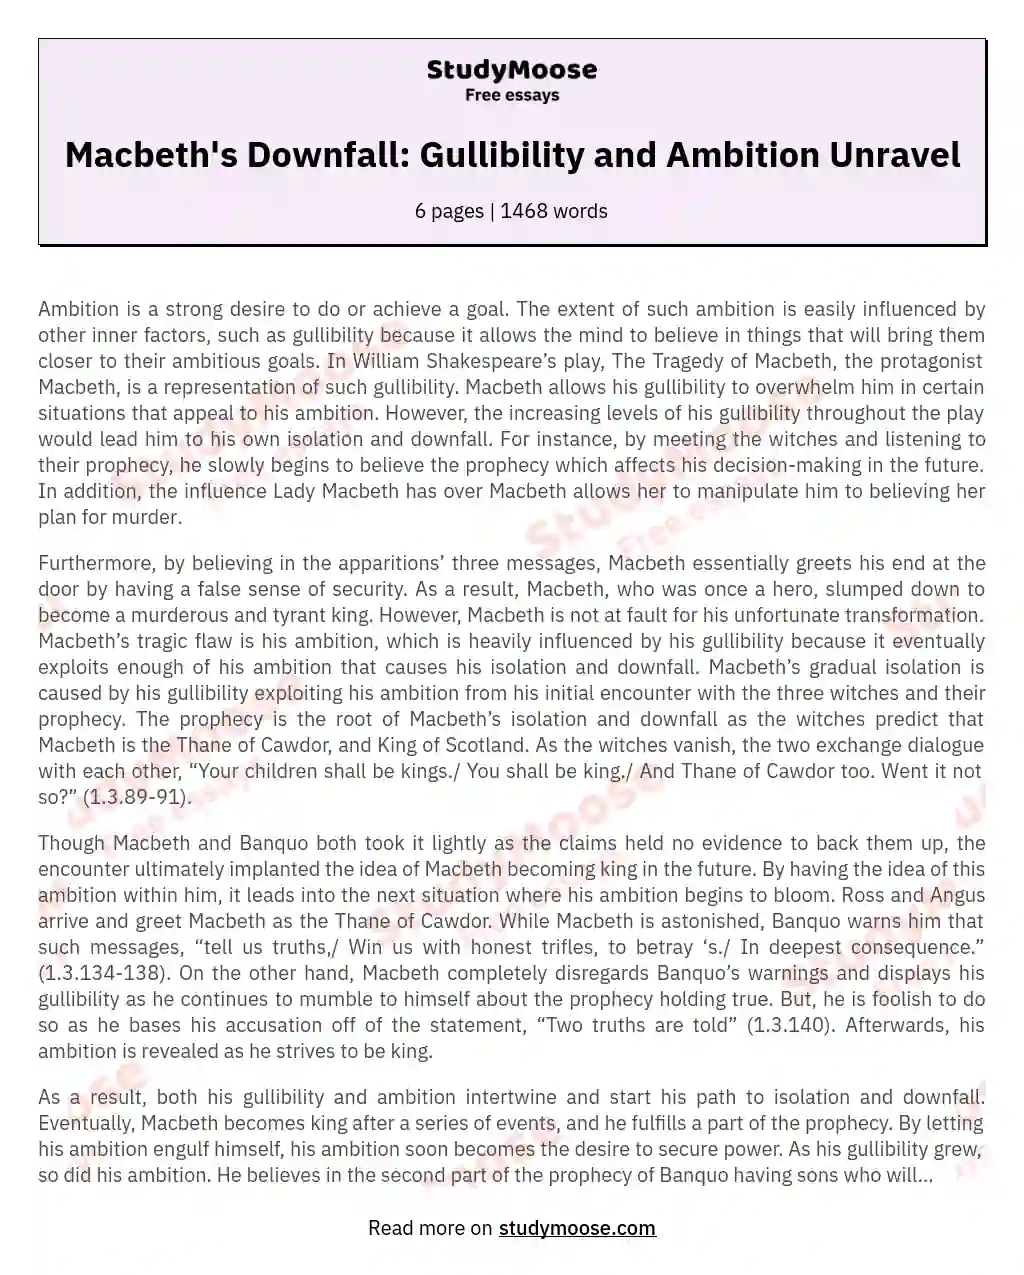 Macbeth's Downfall: Gullibility and Ambition Unravel essay